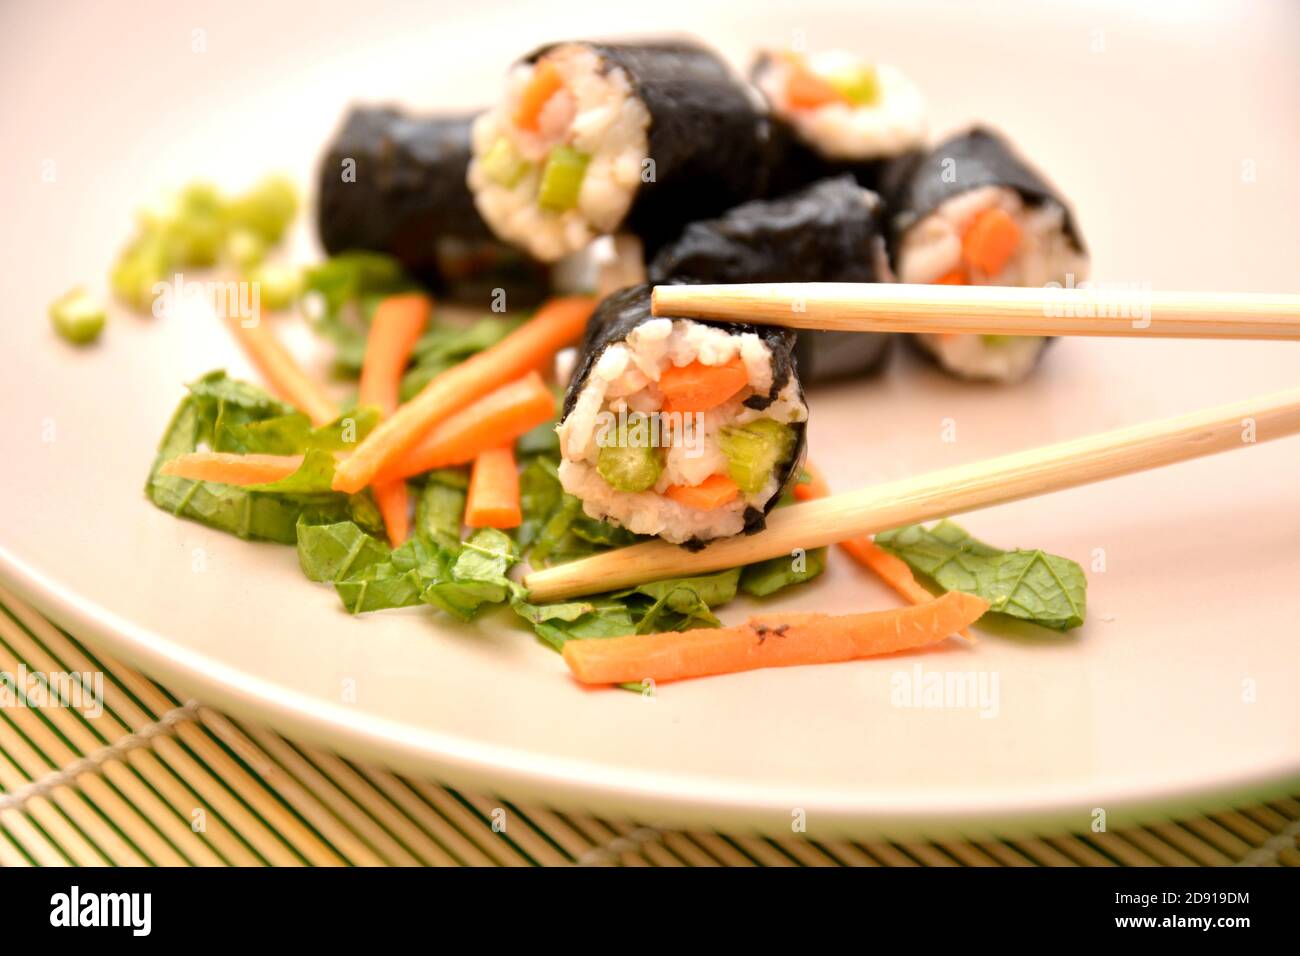 sushi rolls dish asiatic food white rice vegetables  fish sushi in plate Stock Photo